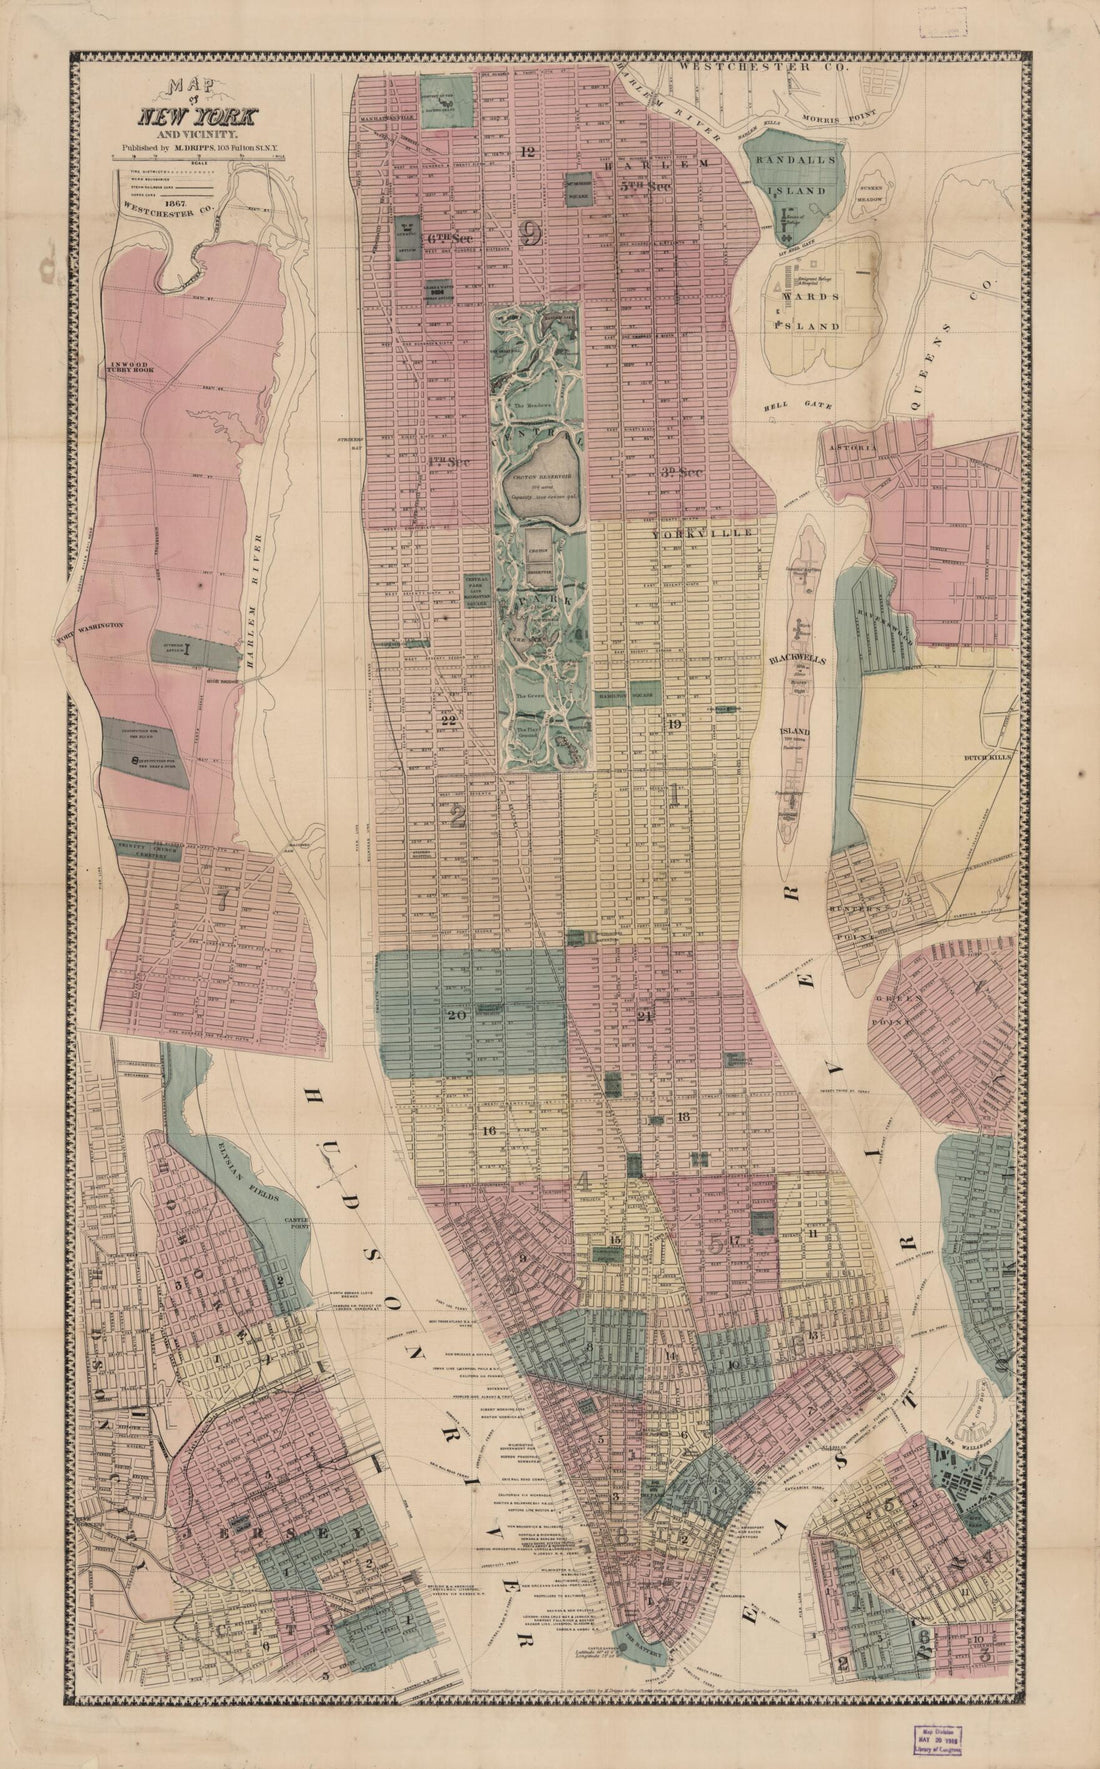 This old map of Map of New York and Vicinity from 1867 was created by M. (Matthew) Dripps in 1867